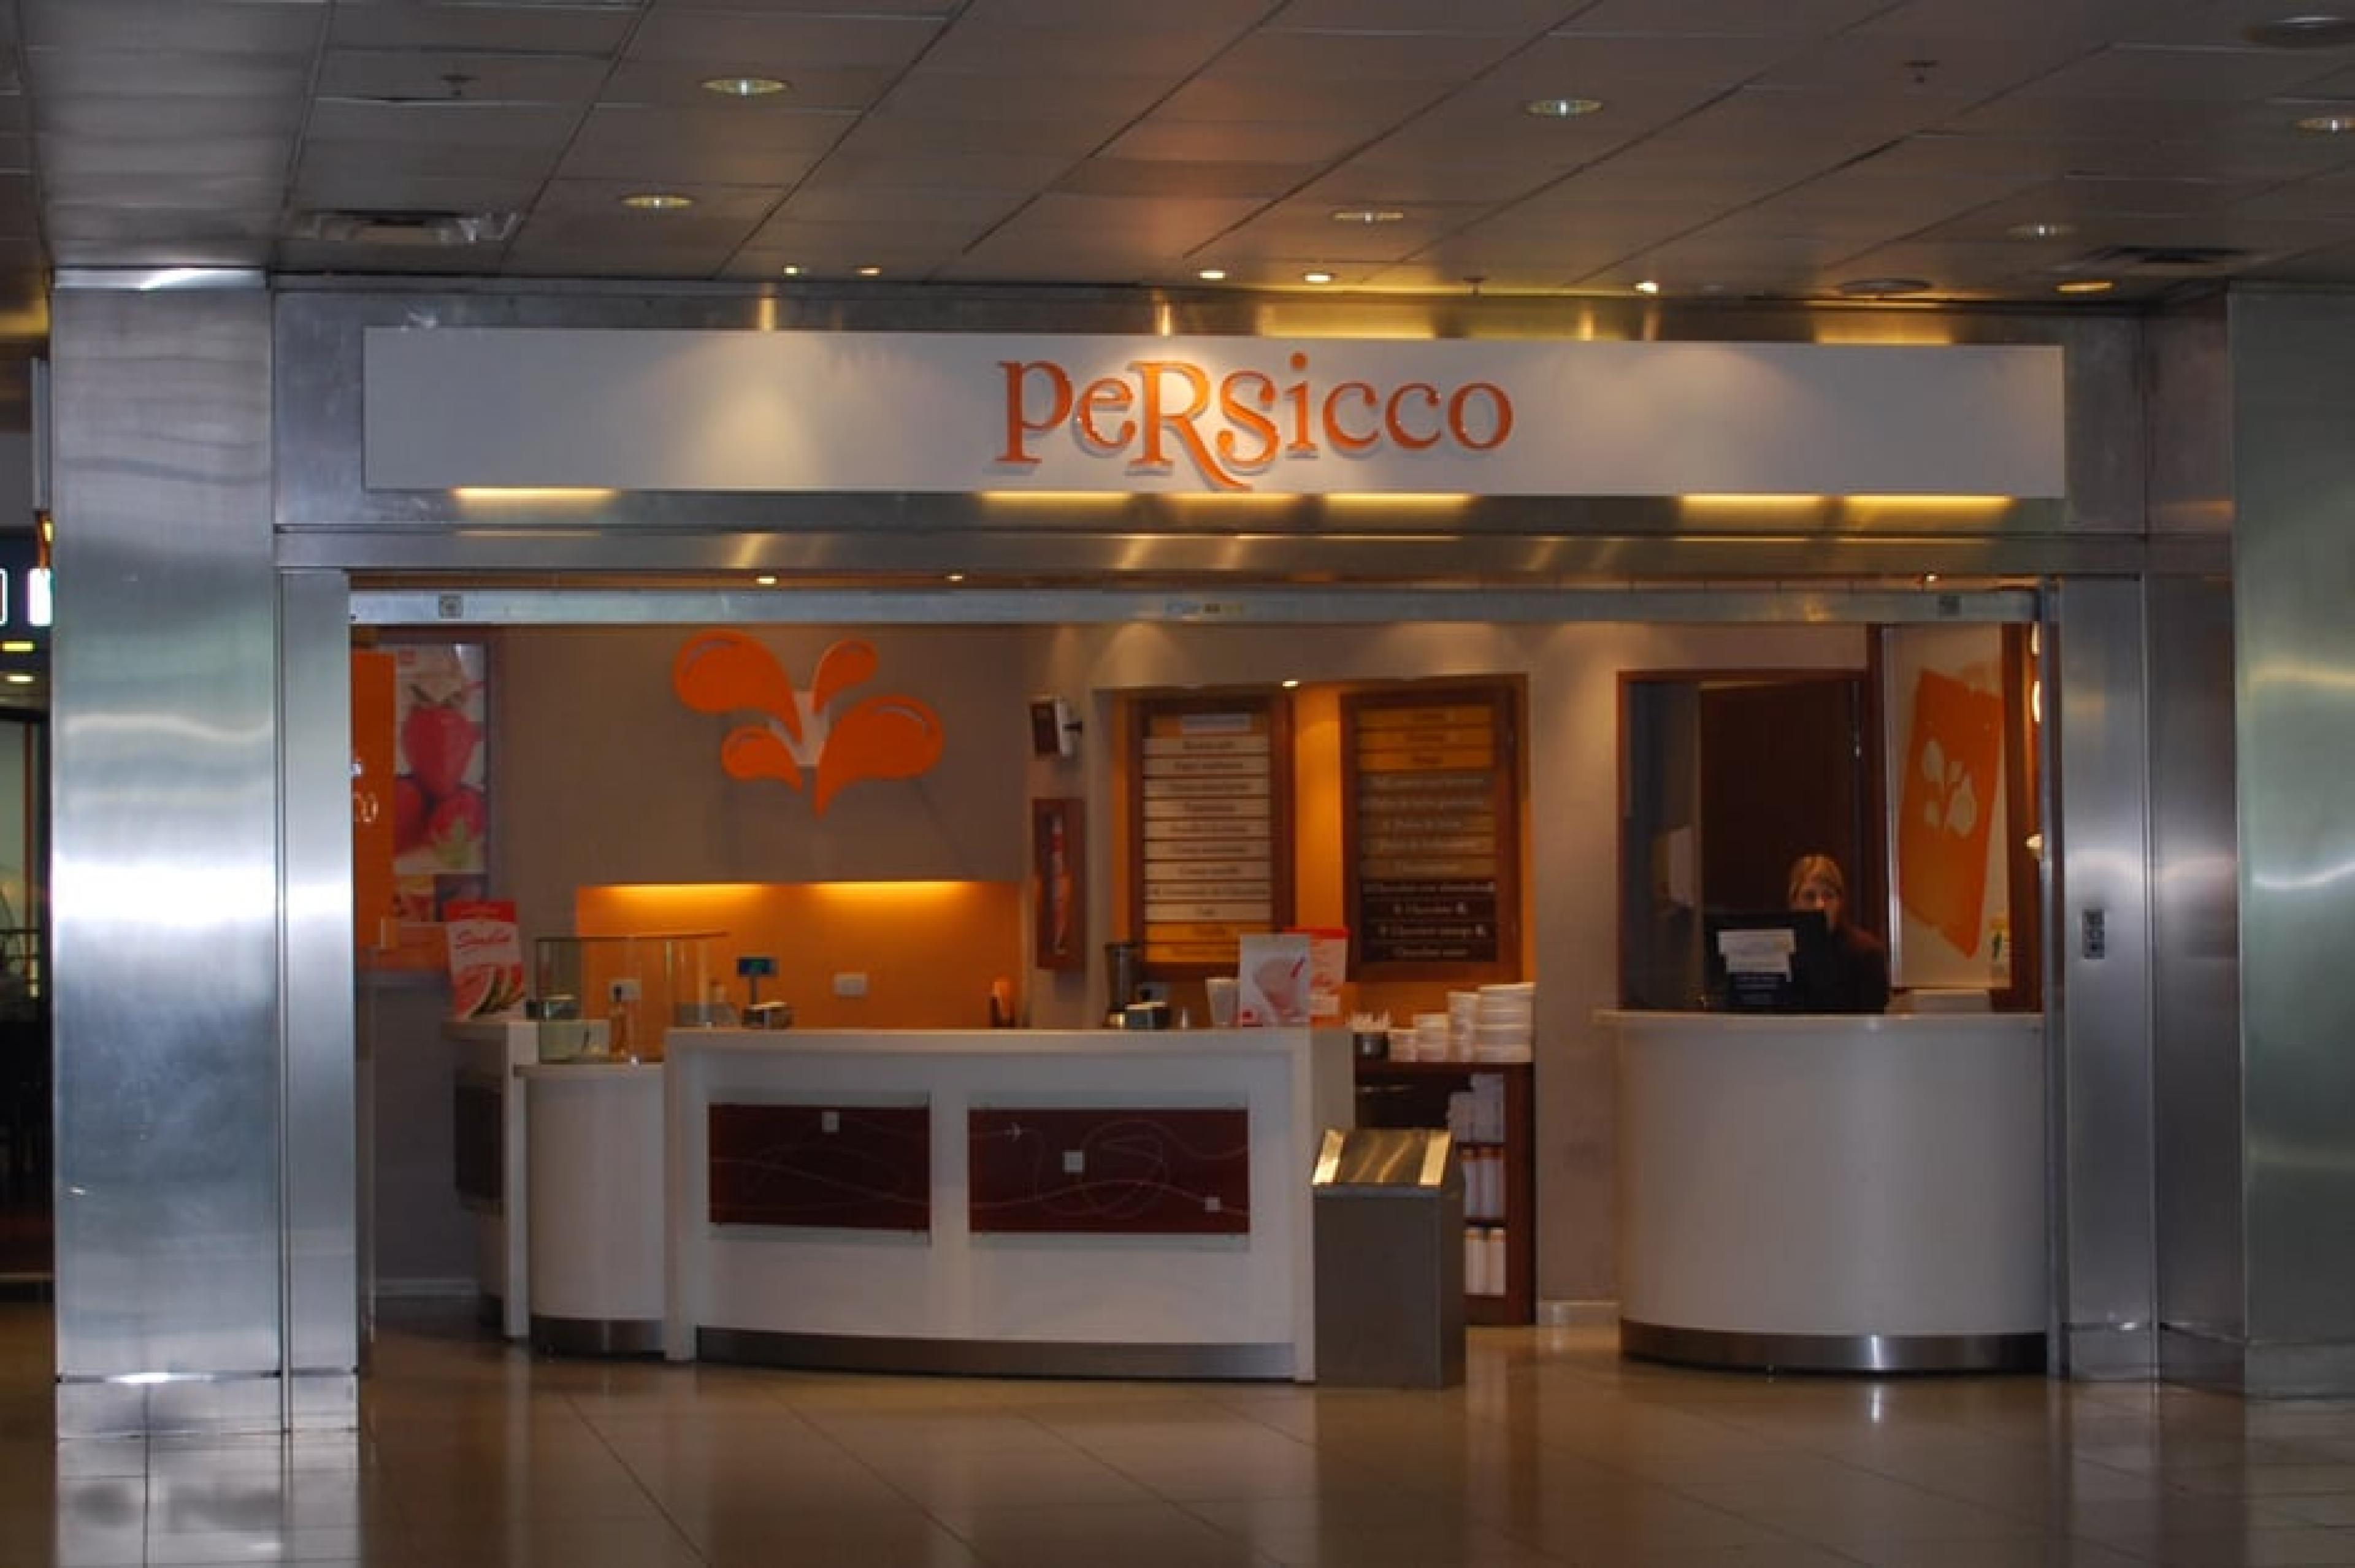 Entrance at Persicco, Buenos Aires, Argentina